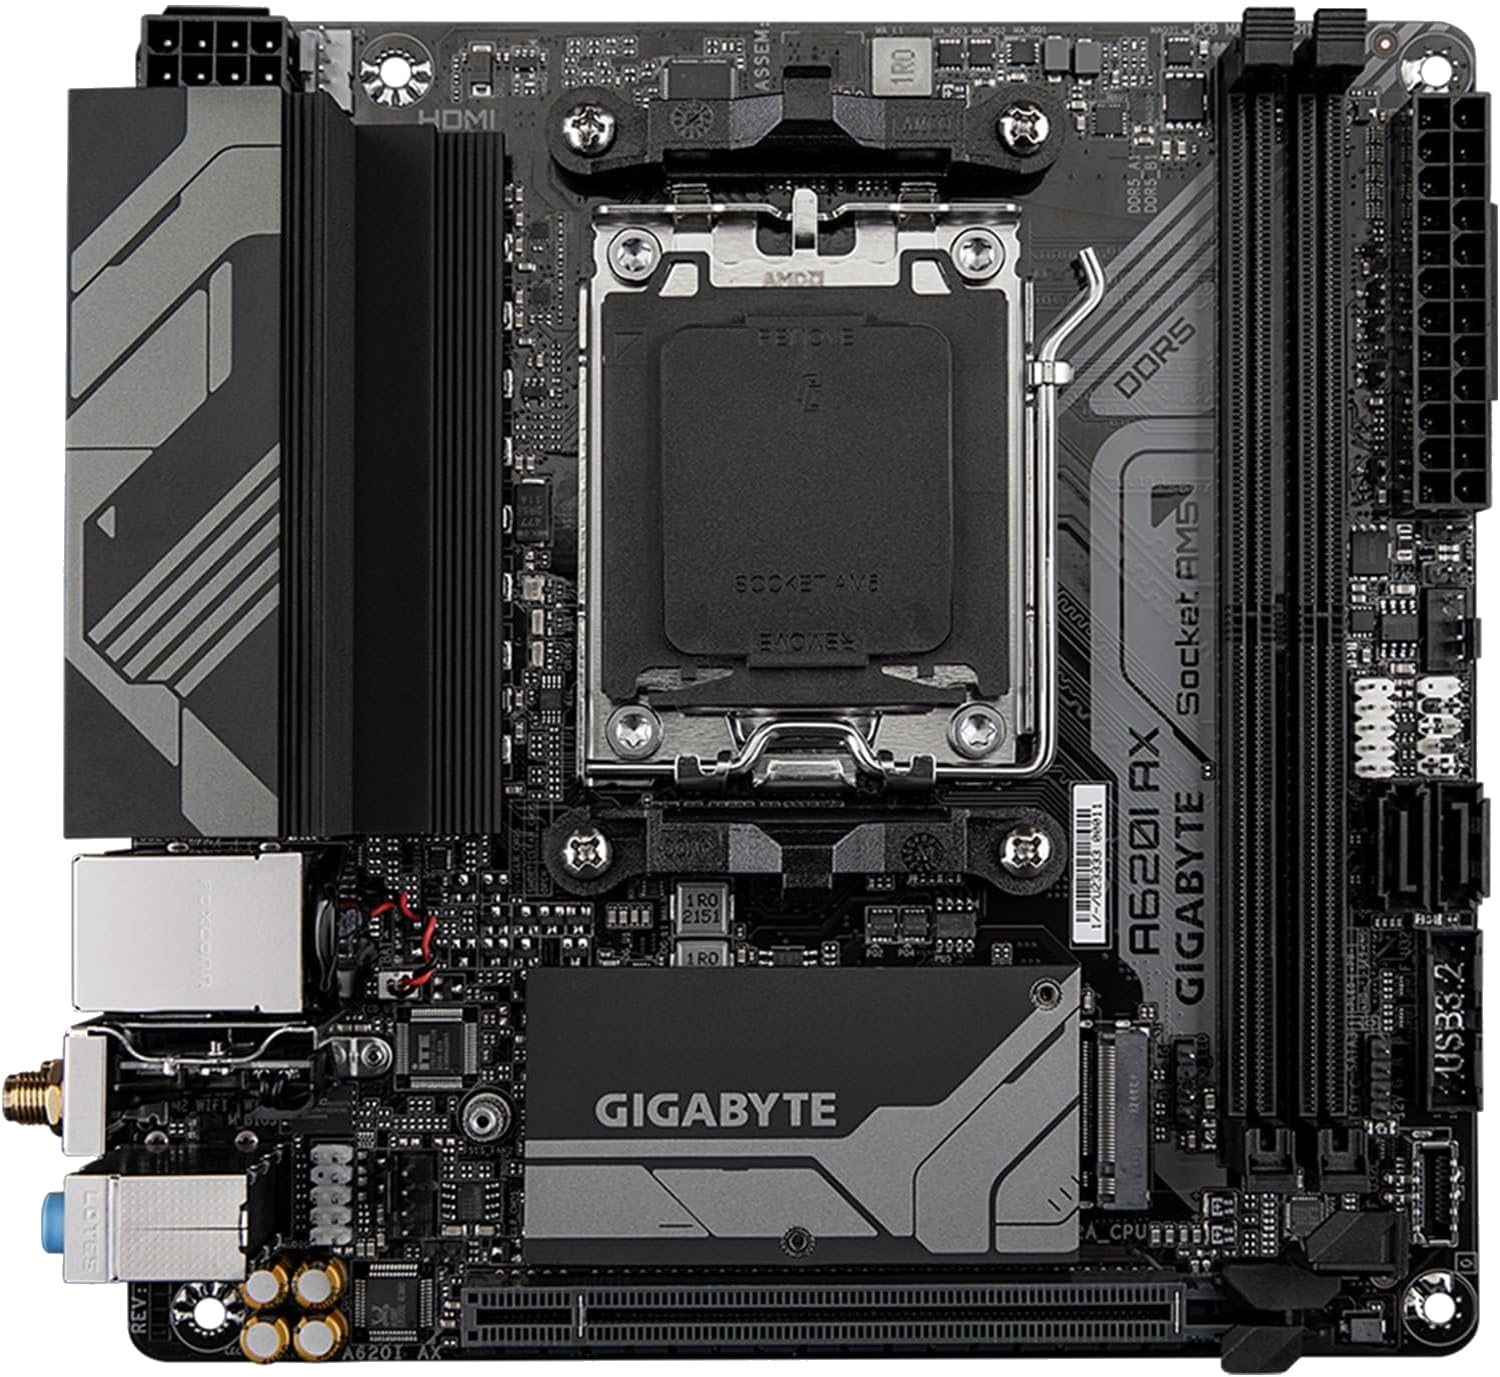 GIGABYTE A620I AX mini itx motherboard with black accents